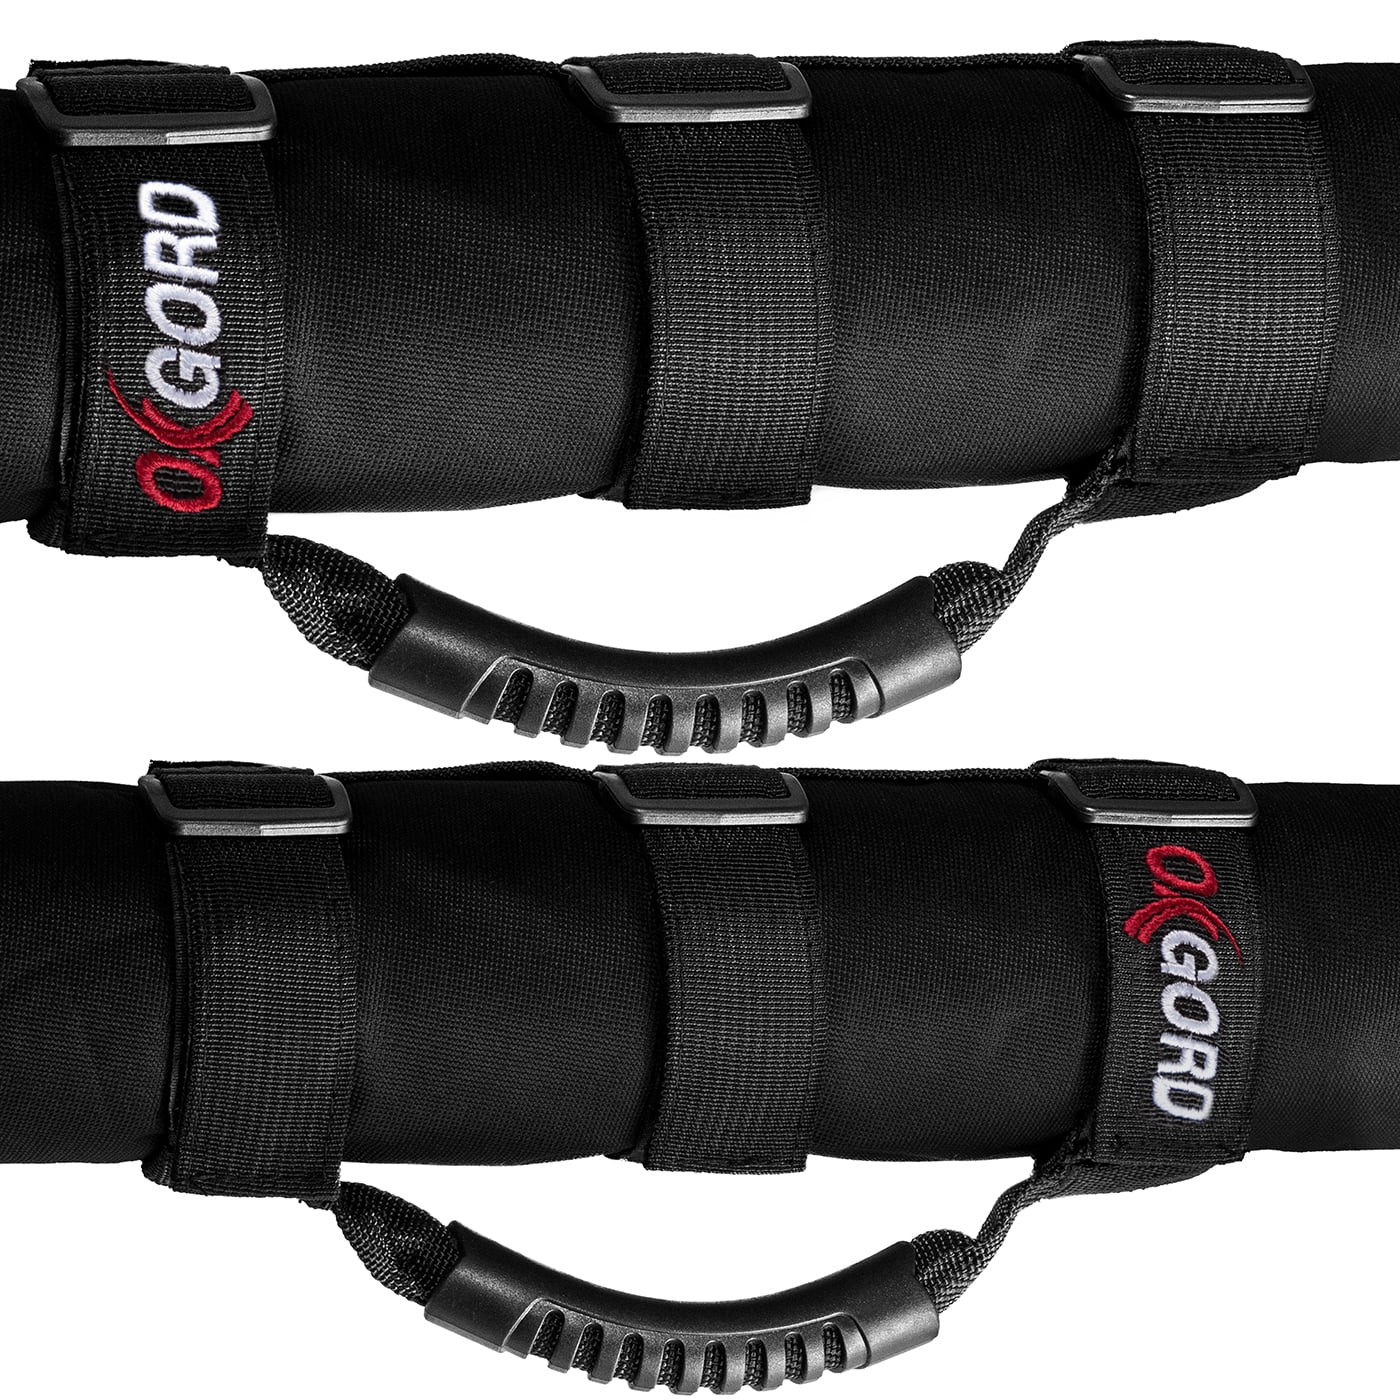 Pack of 2 Fits 1 1/2 to 3 Inch Roll Bars UTV & ATV Gear OxGord Roll Bar Grab Handle Set for Jeep 